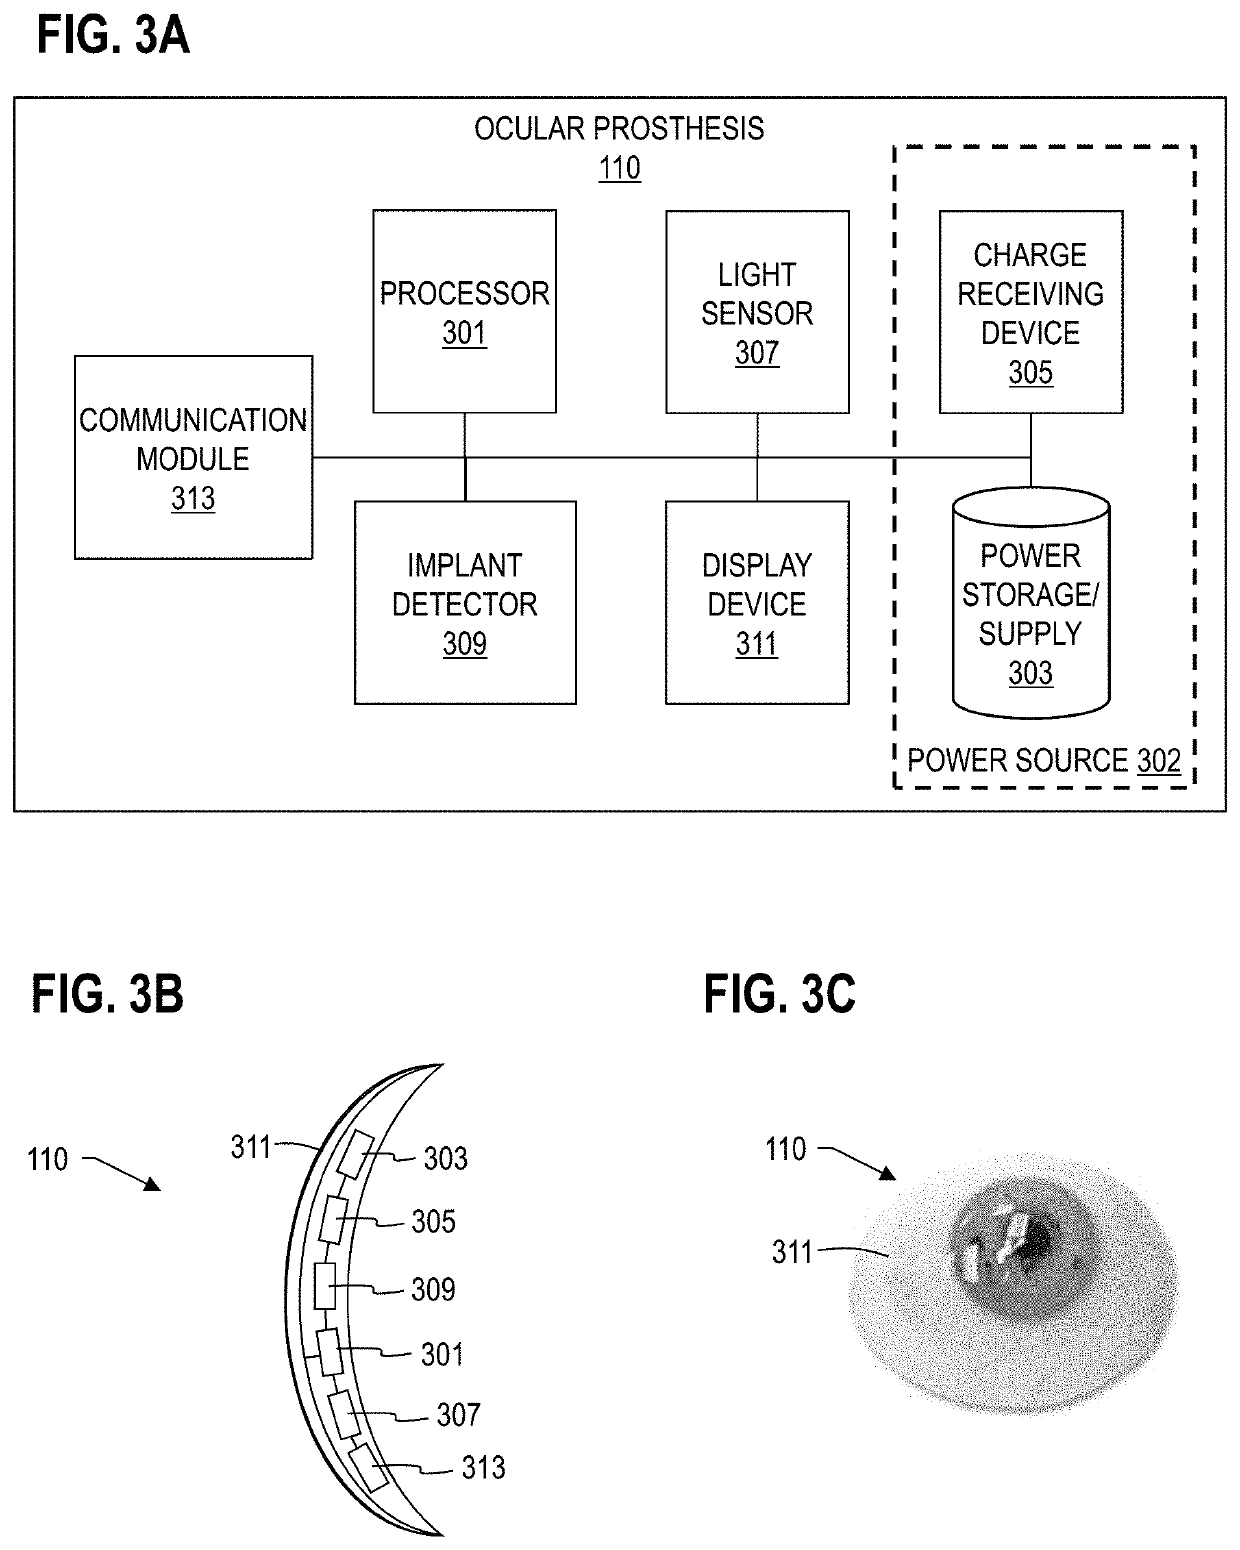 Ocular prosthesis with display device